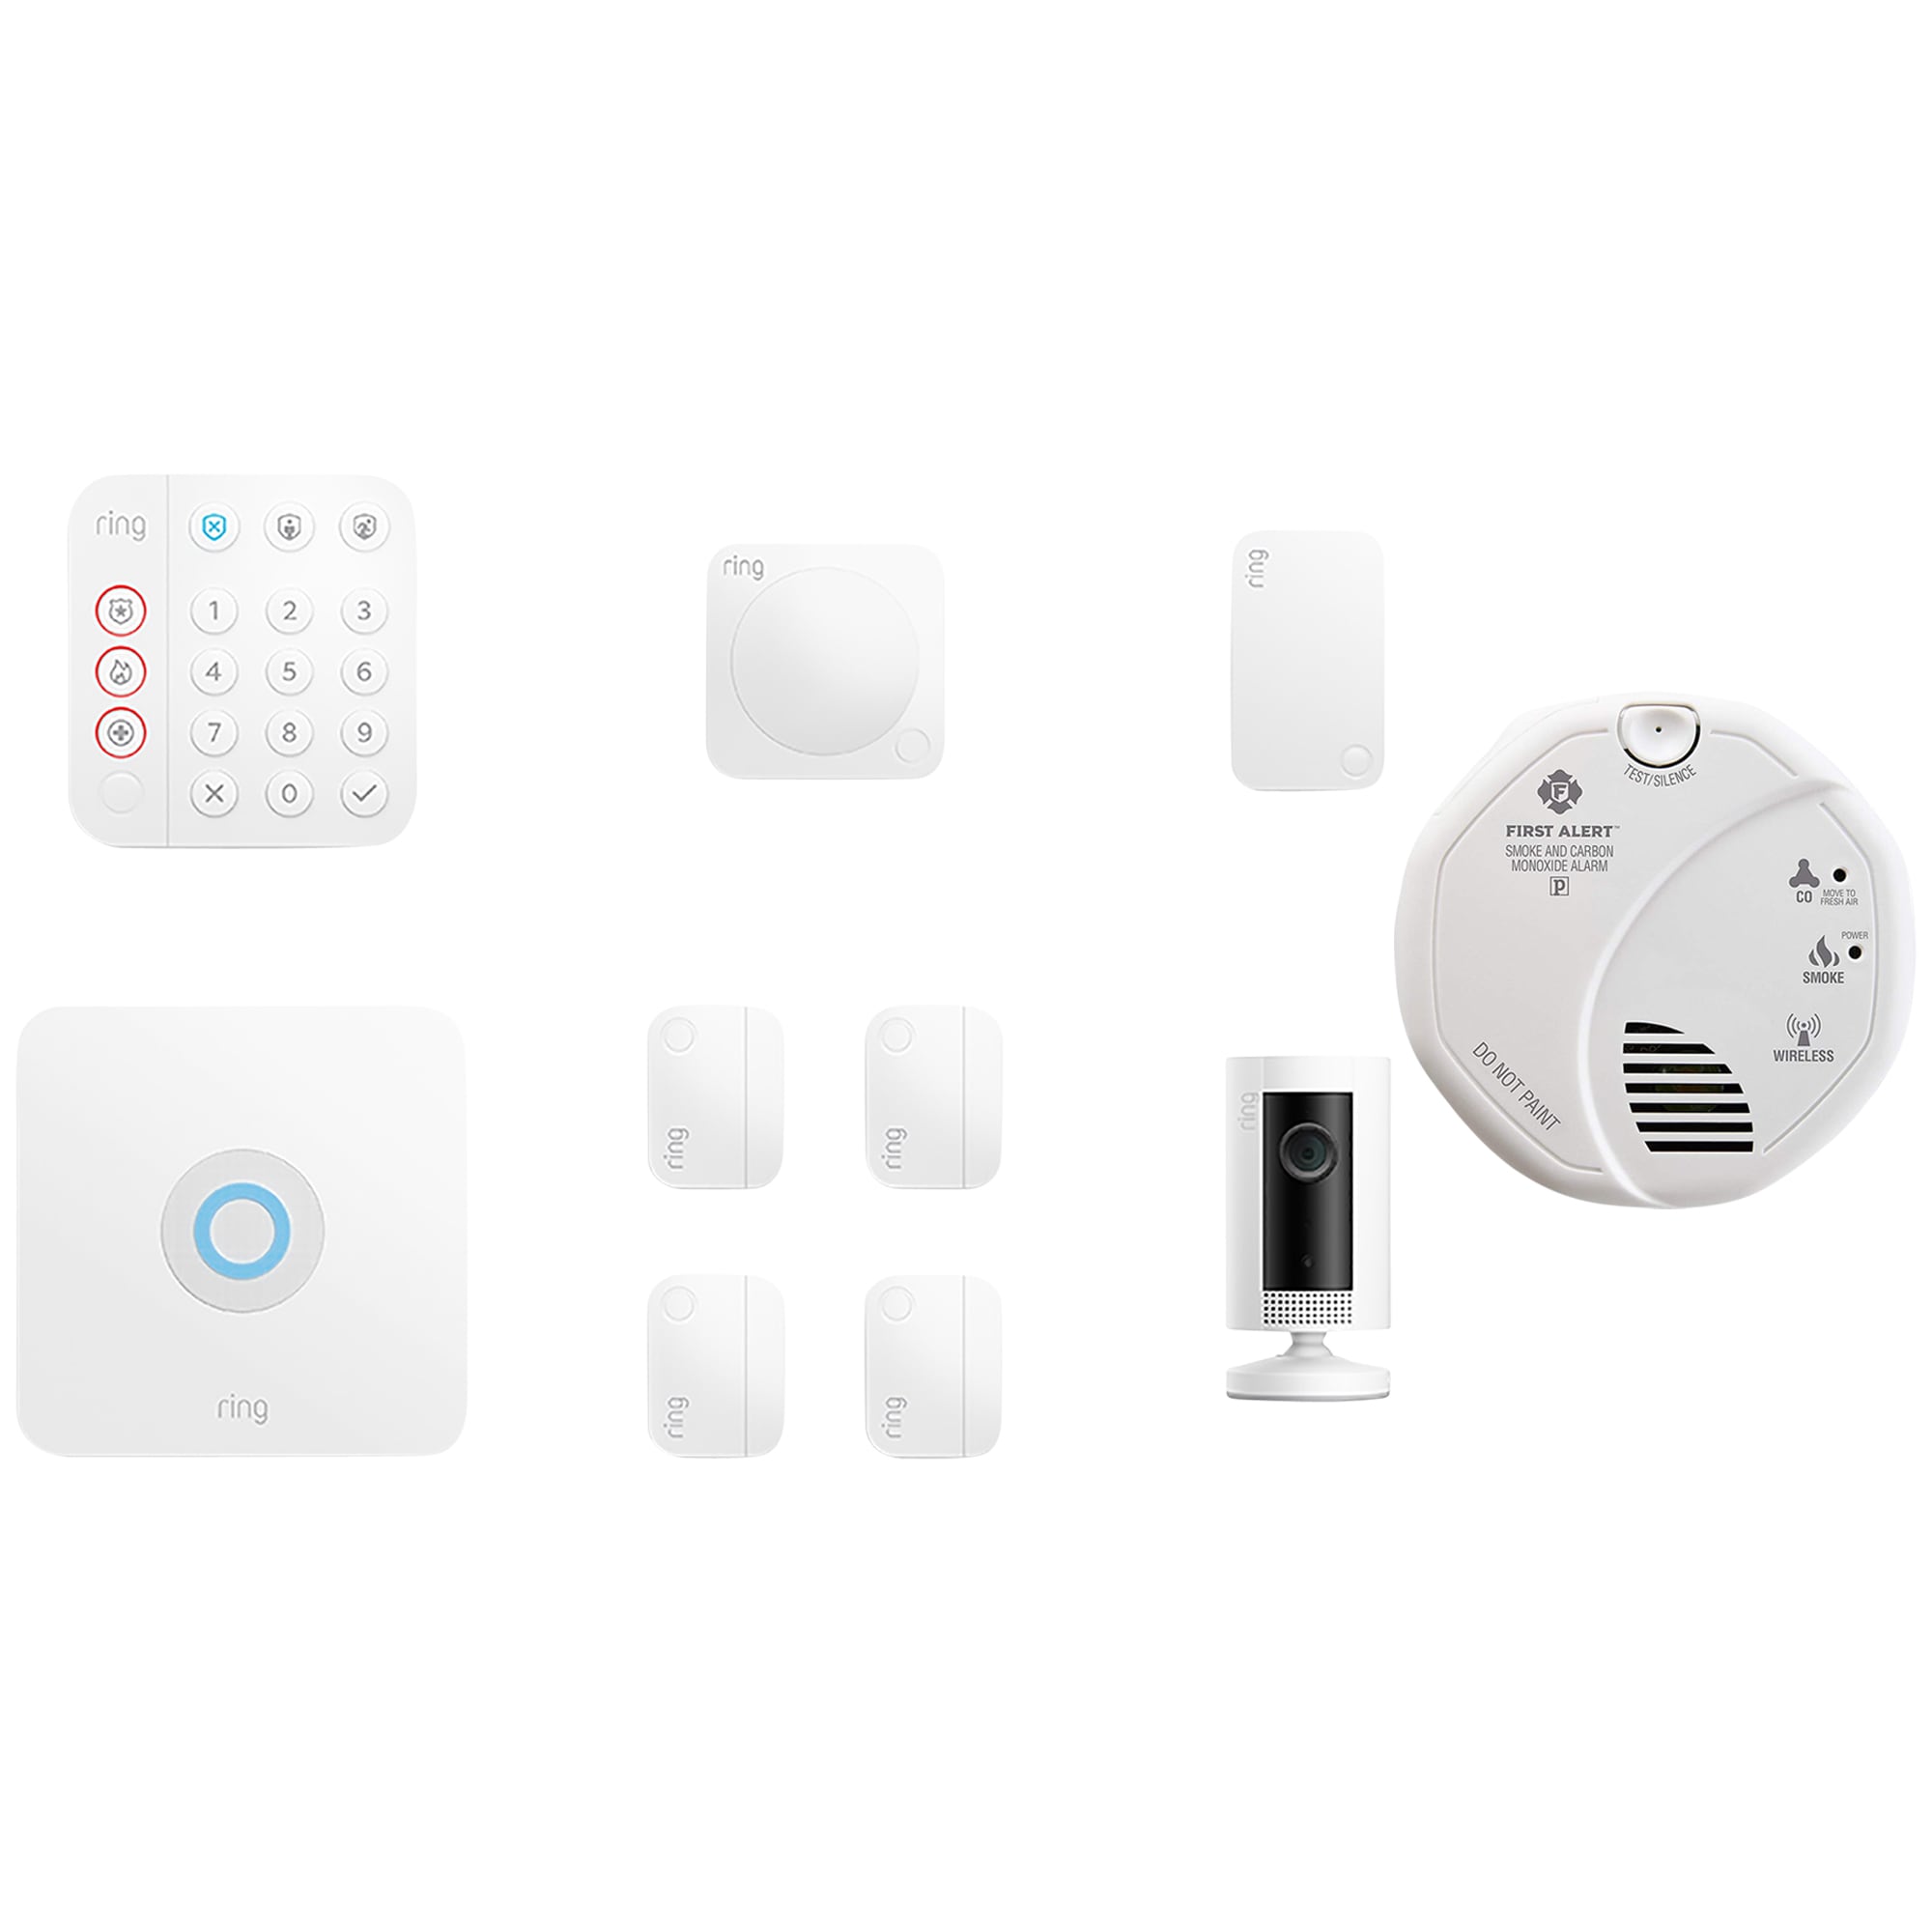 Ring Alarm 8-Piece Security Kit (2nd Generation) Home security system with  base station, keypad, range extender, and extra sensors at Crutchfield